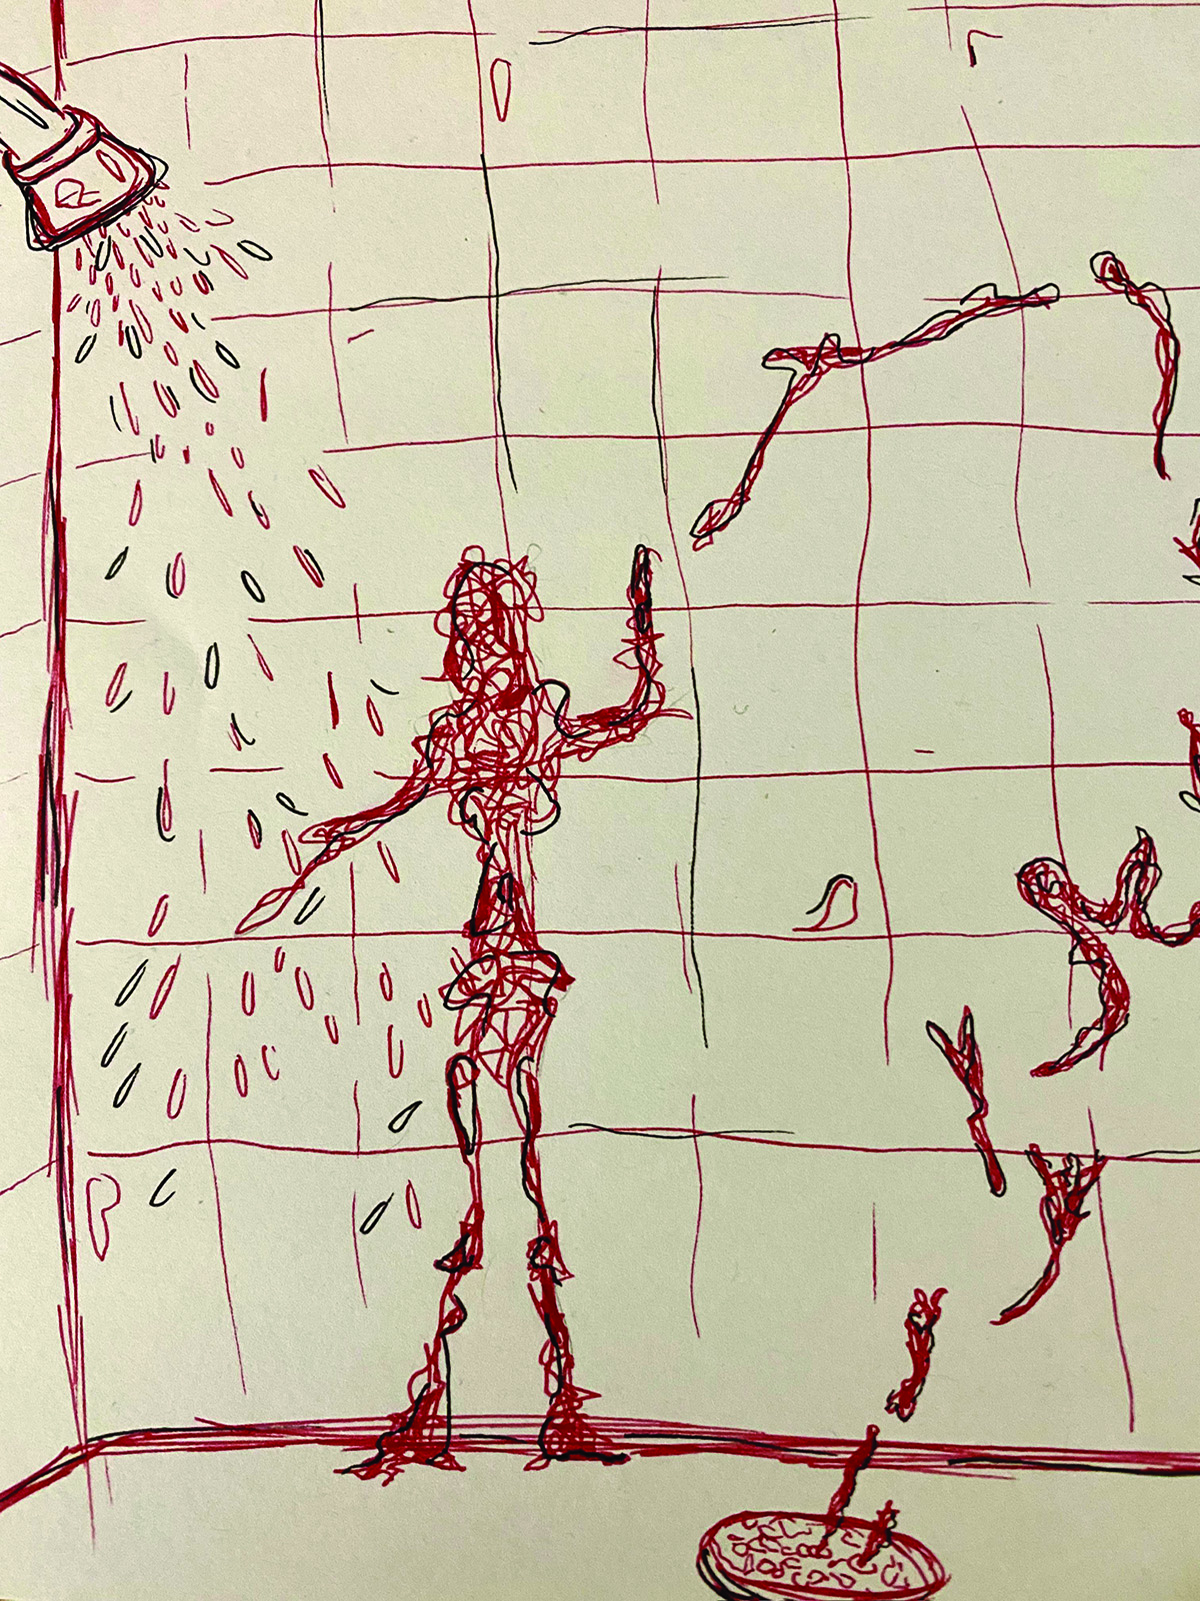 Drawing of a figure in a tiled shower made with red and black pen. The figure at the center of the drawing is comprised of scribbled, overlapping, non-uniform lines, and is facing the viewer with the arm on the right side raised. The raised arm meets an arc of similarly scribbled, thinner organic shapes that end at the drain at the bottom of the drawing, shifted to the right compared to the figure. The corner of the shower is visible on the left side, with the showerhead in the top left corner. The showerhead is spraying black and red water droplets that only reach the left side of the figure, with the arm on the left side extended into the water. The drawing is done on a beige paper background.